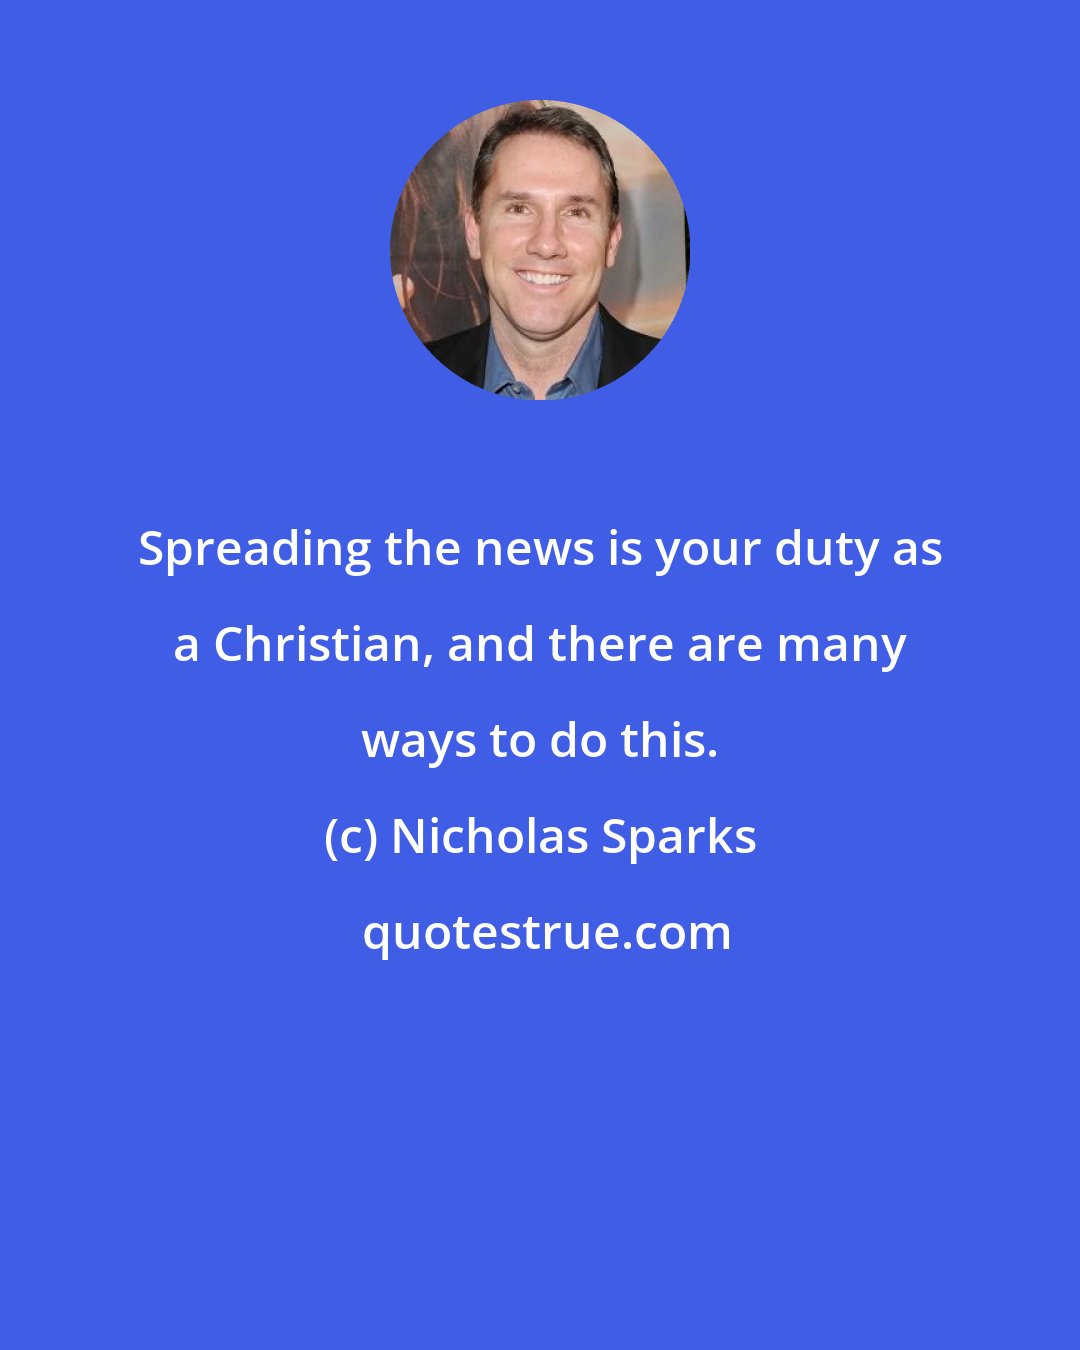 Nicholas Sparks: Spreading the news is your duty as a Christian, and there are many ways to do this.